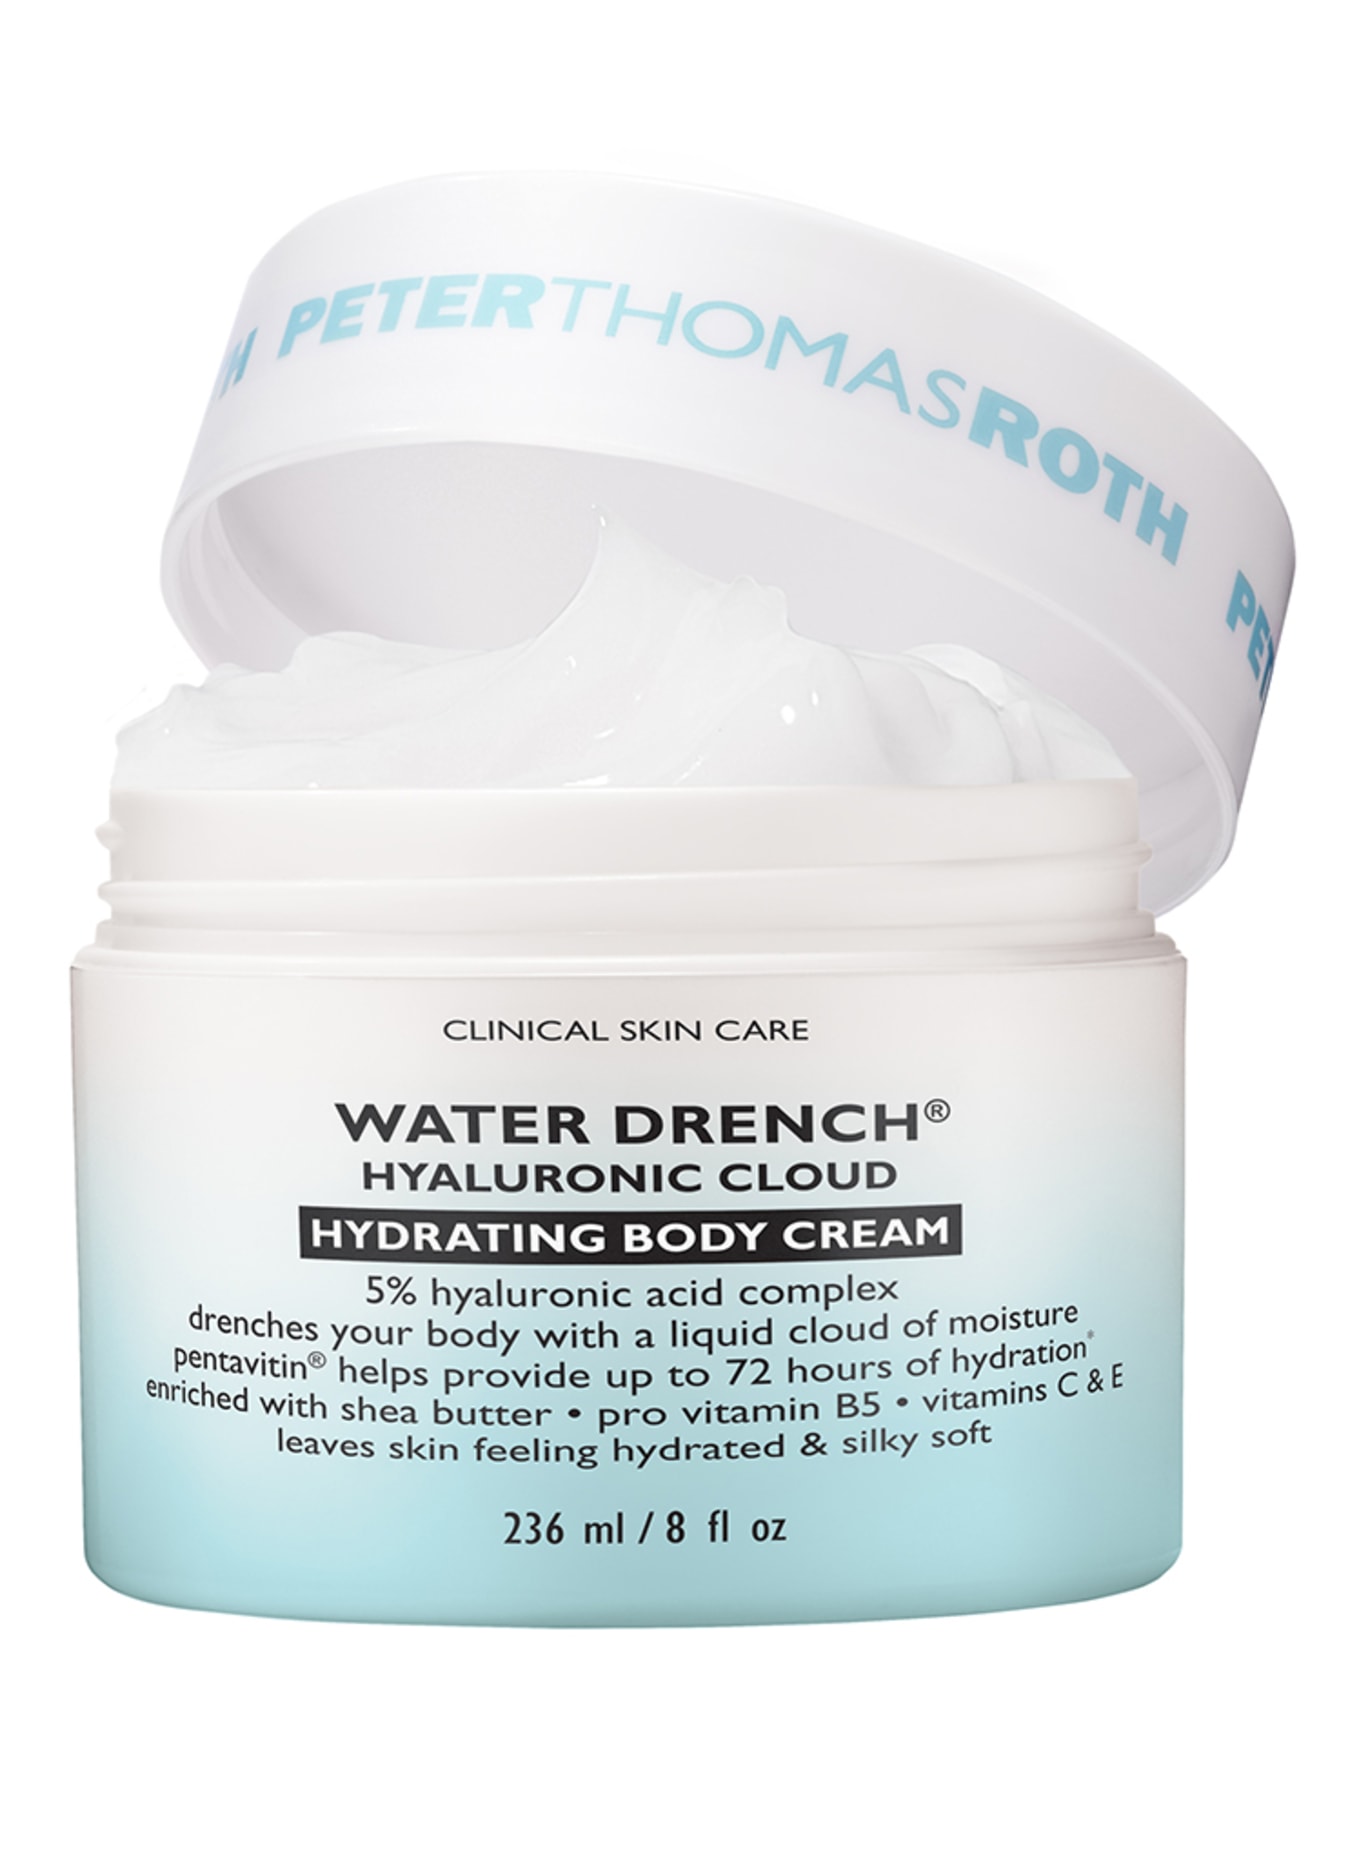 PETER THOMAS ROTH WATER DRENCH® HYALURONIC CLOUD (Obrazek 2)